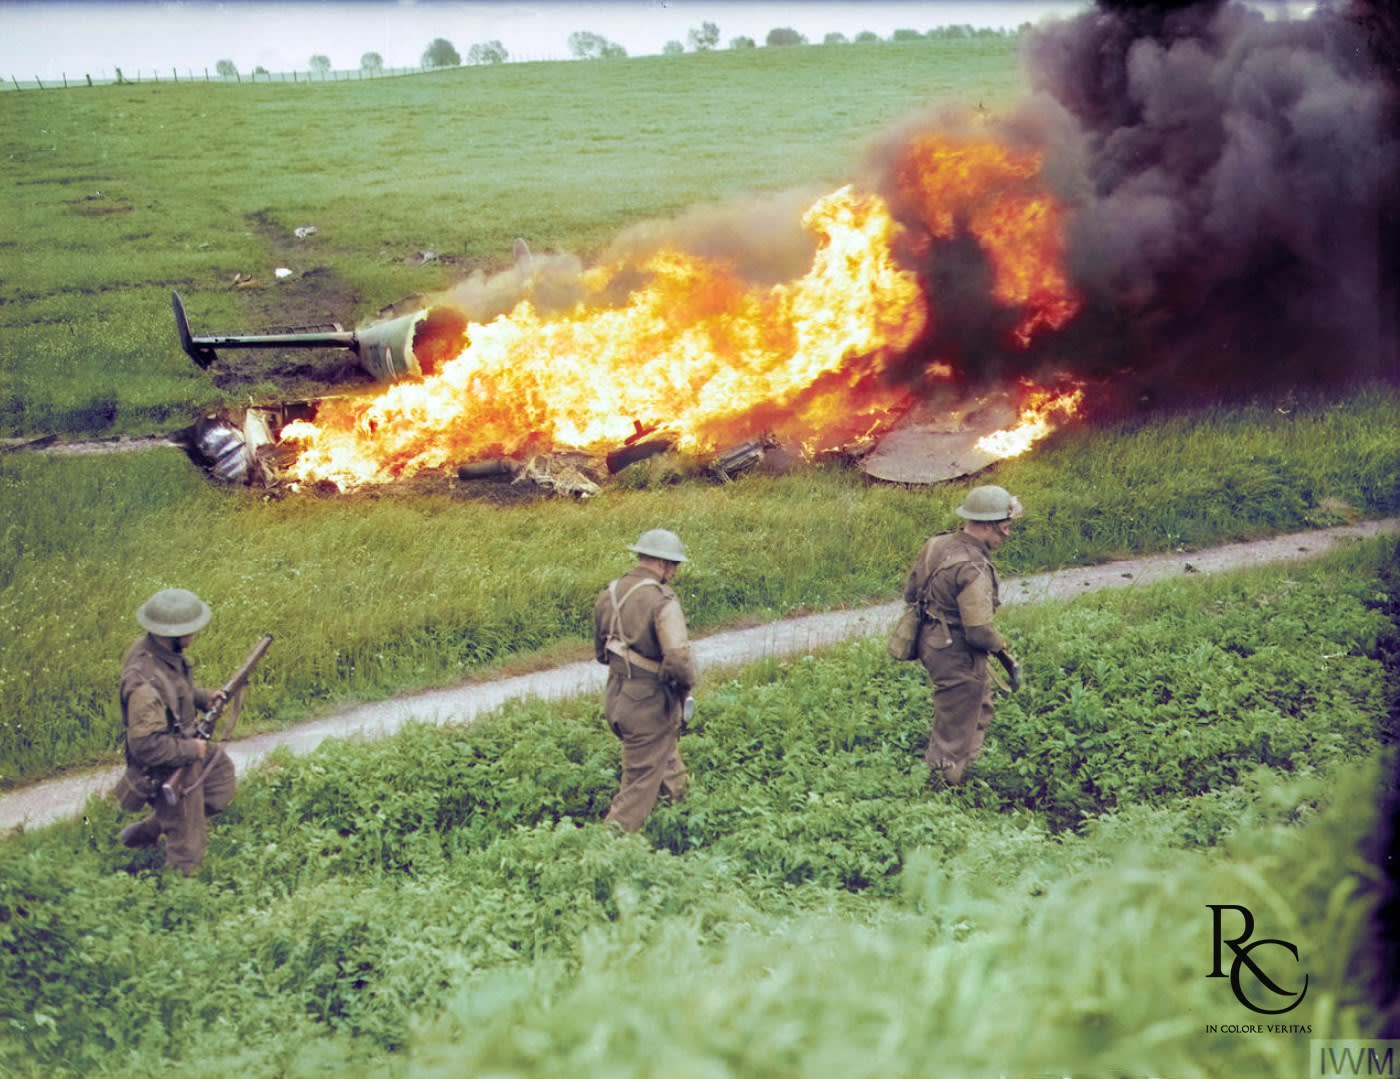 Three British soldiers march past the burning wreckage of a shot-down French Potez 630 reconnaissance aircraft near Braine-le-Comte, Belgium, 16 May 1940. [Colorized]